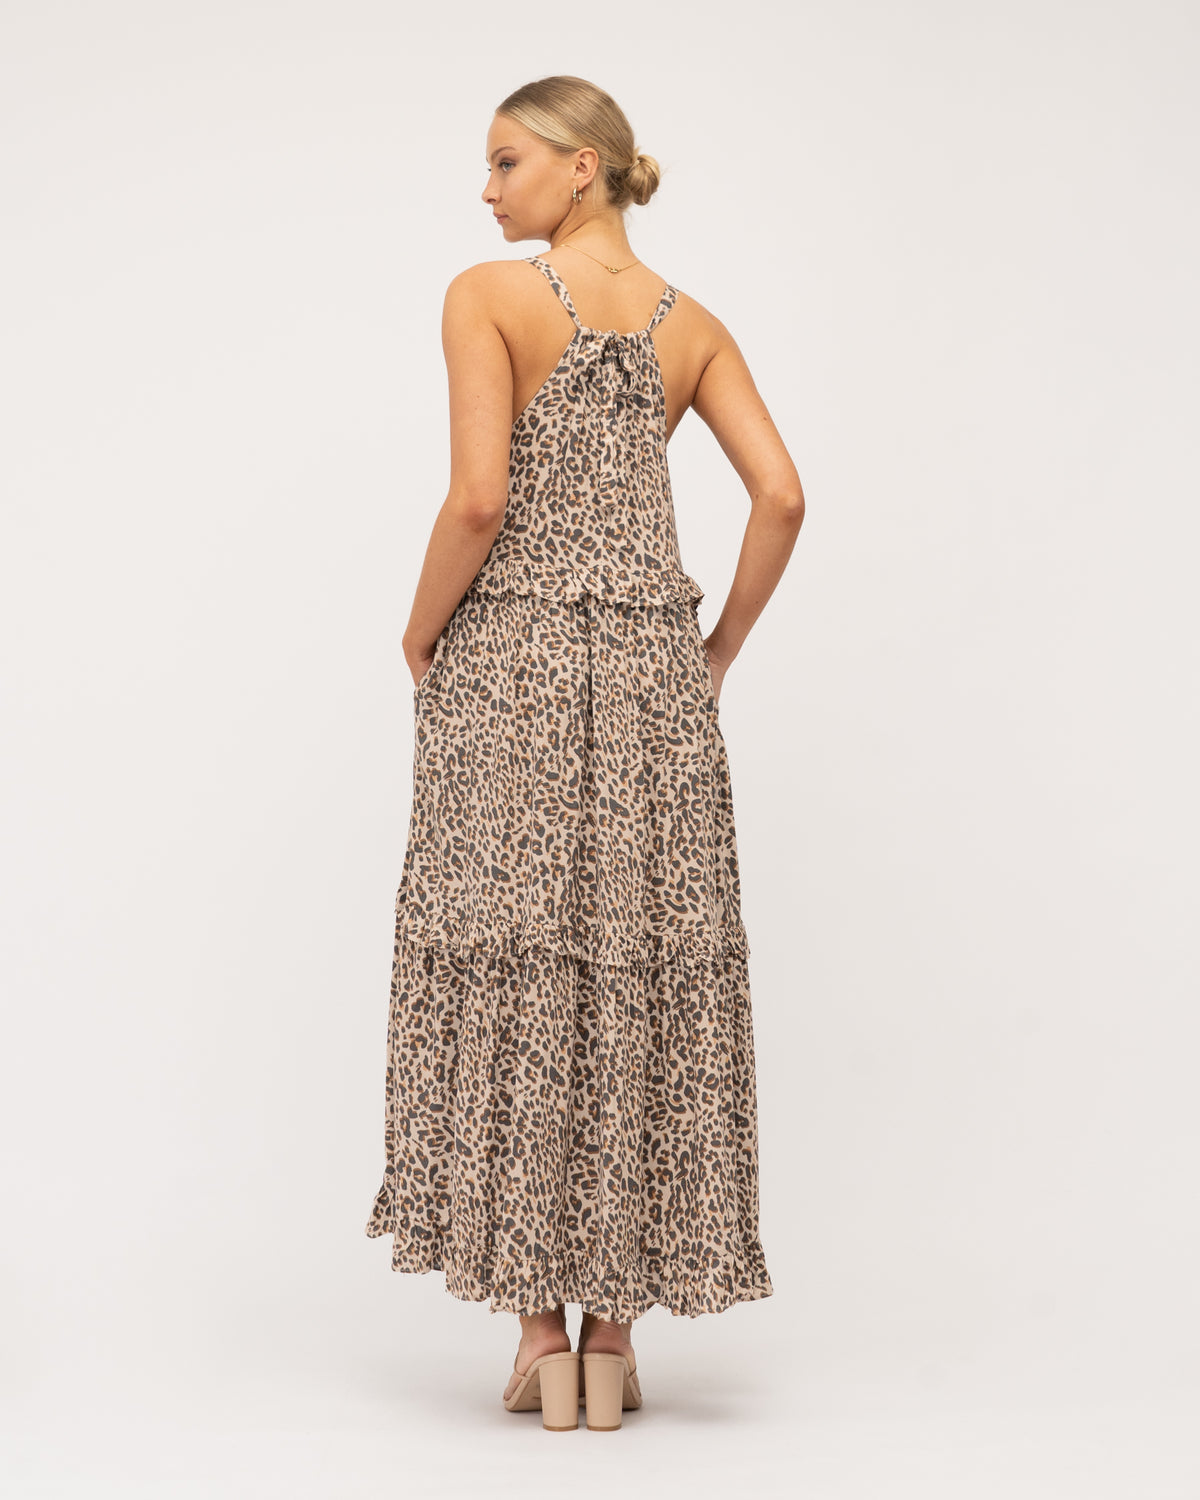 A model wearing Global Fashion House maxi tiered dress featuring animal print, shirring detail at the neckline, adjustable straps that tie at the back.